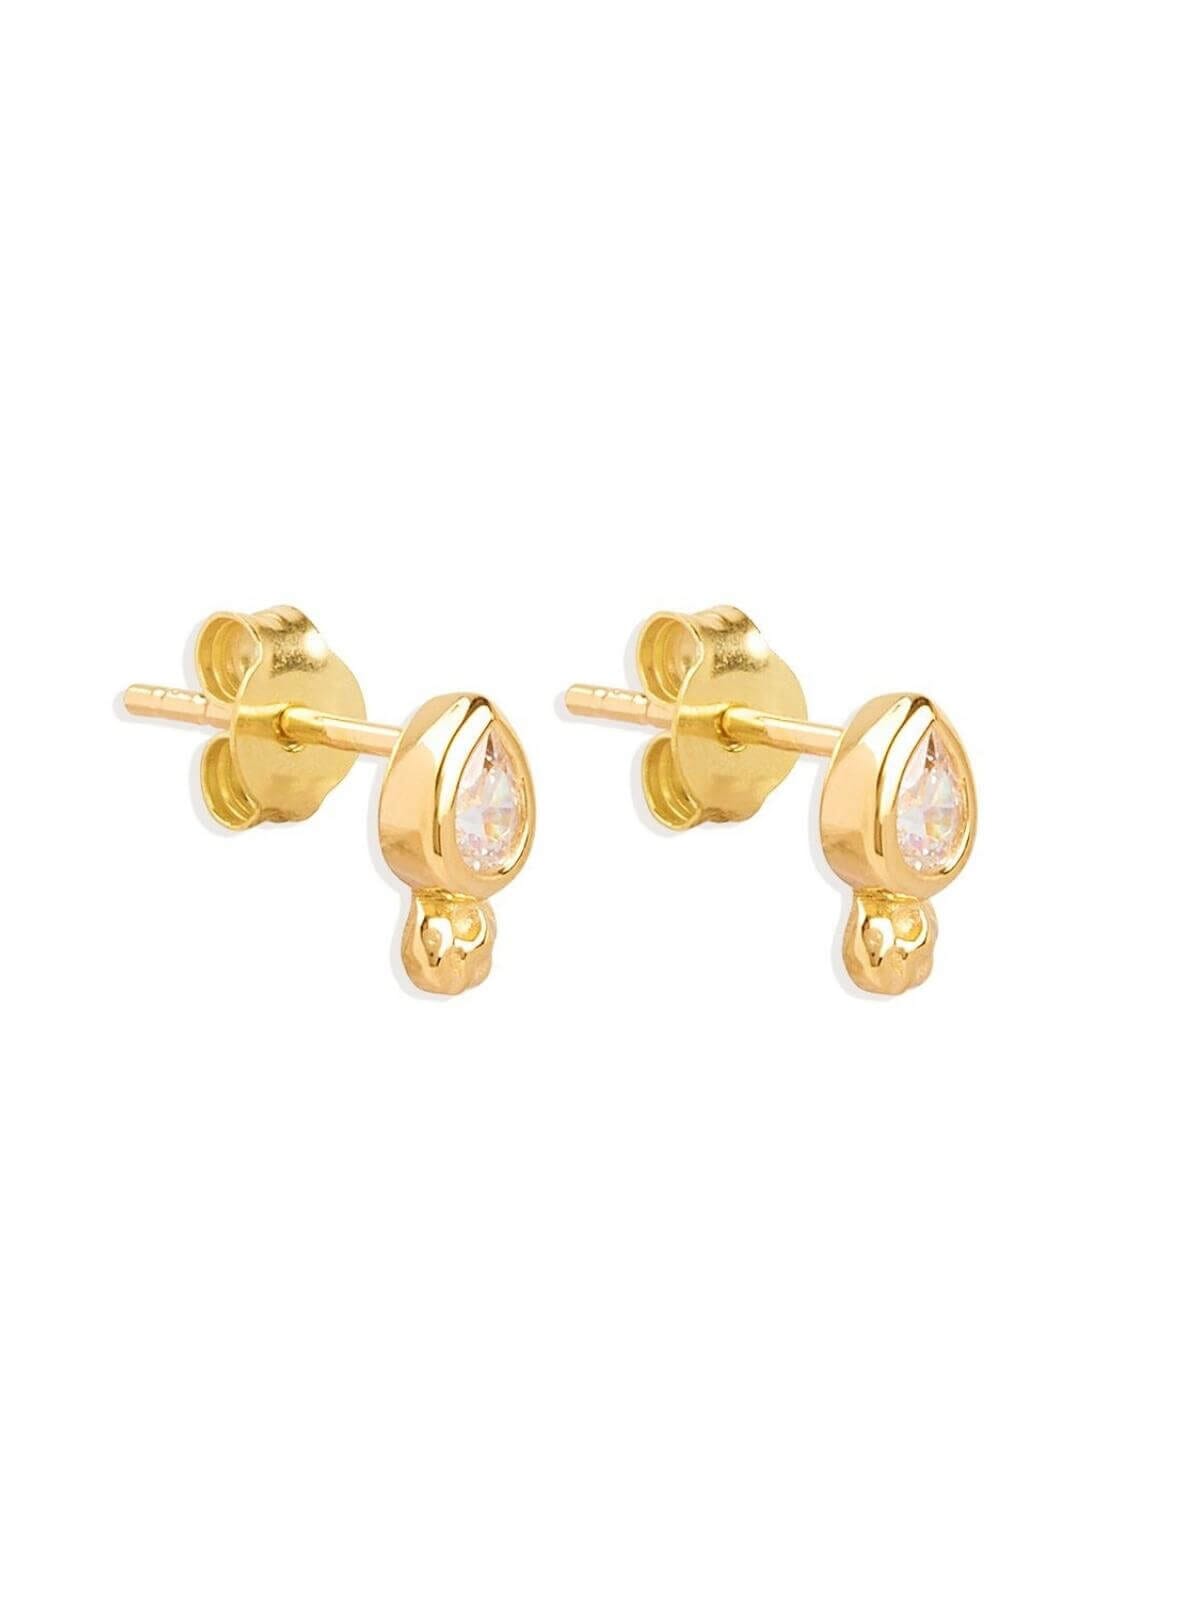 By Charlotte | Adore You Stud Earrings - Gold | Perlu